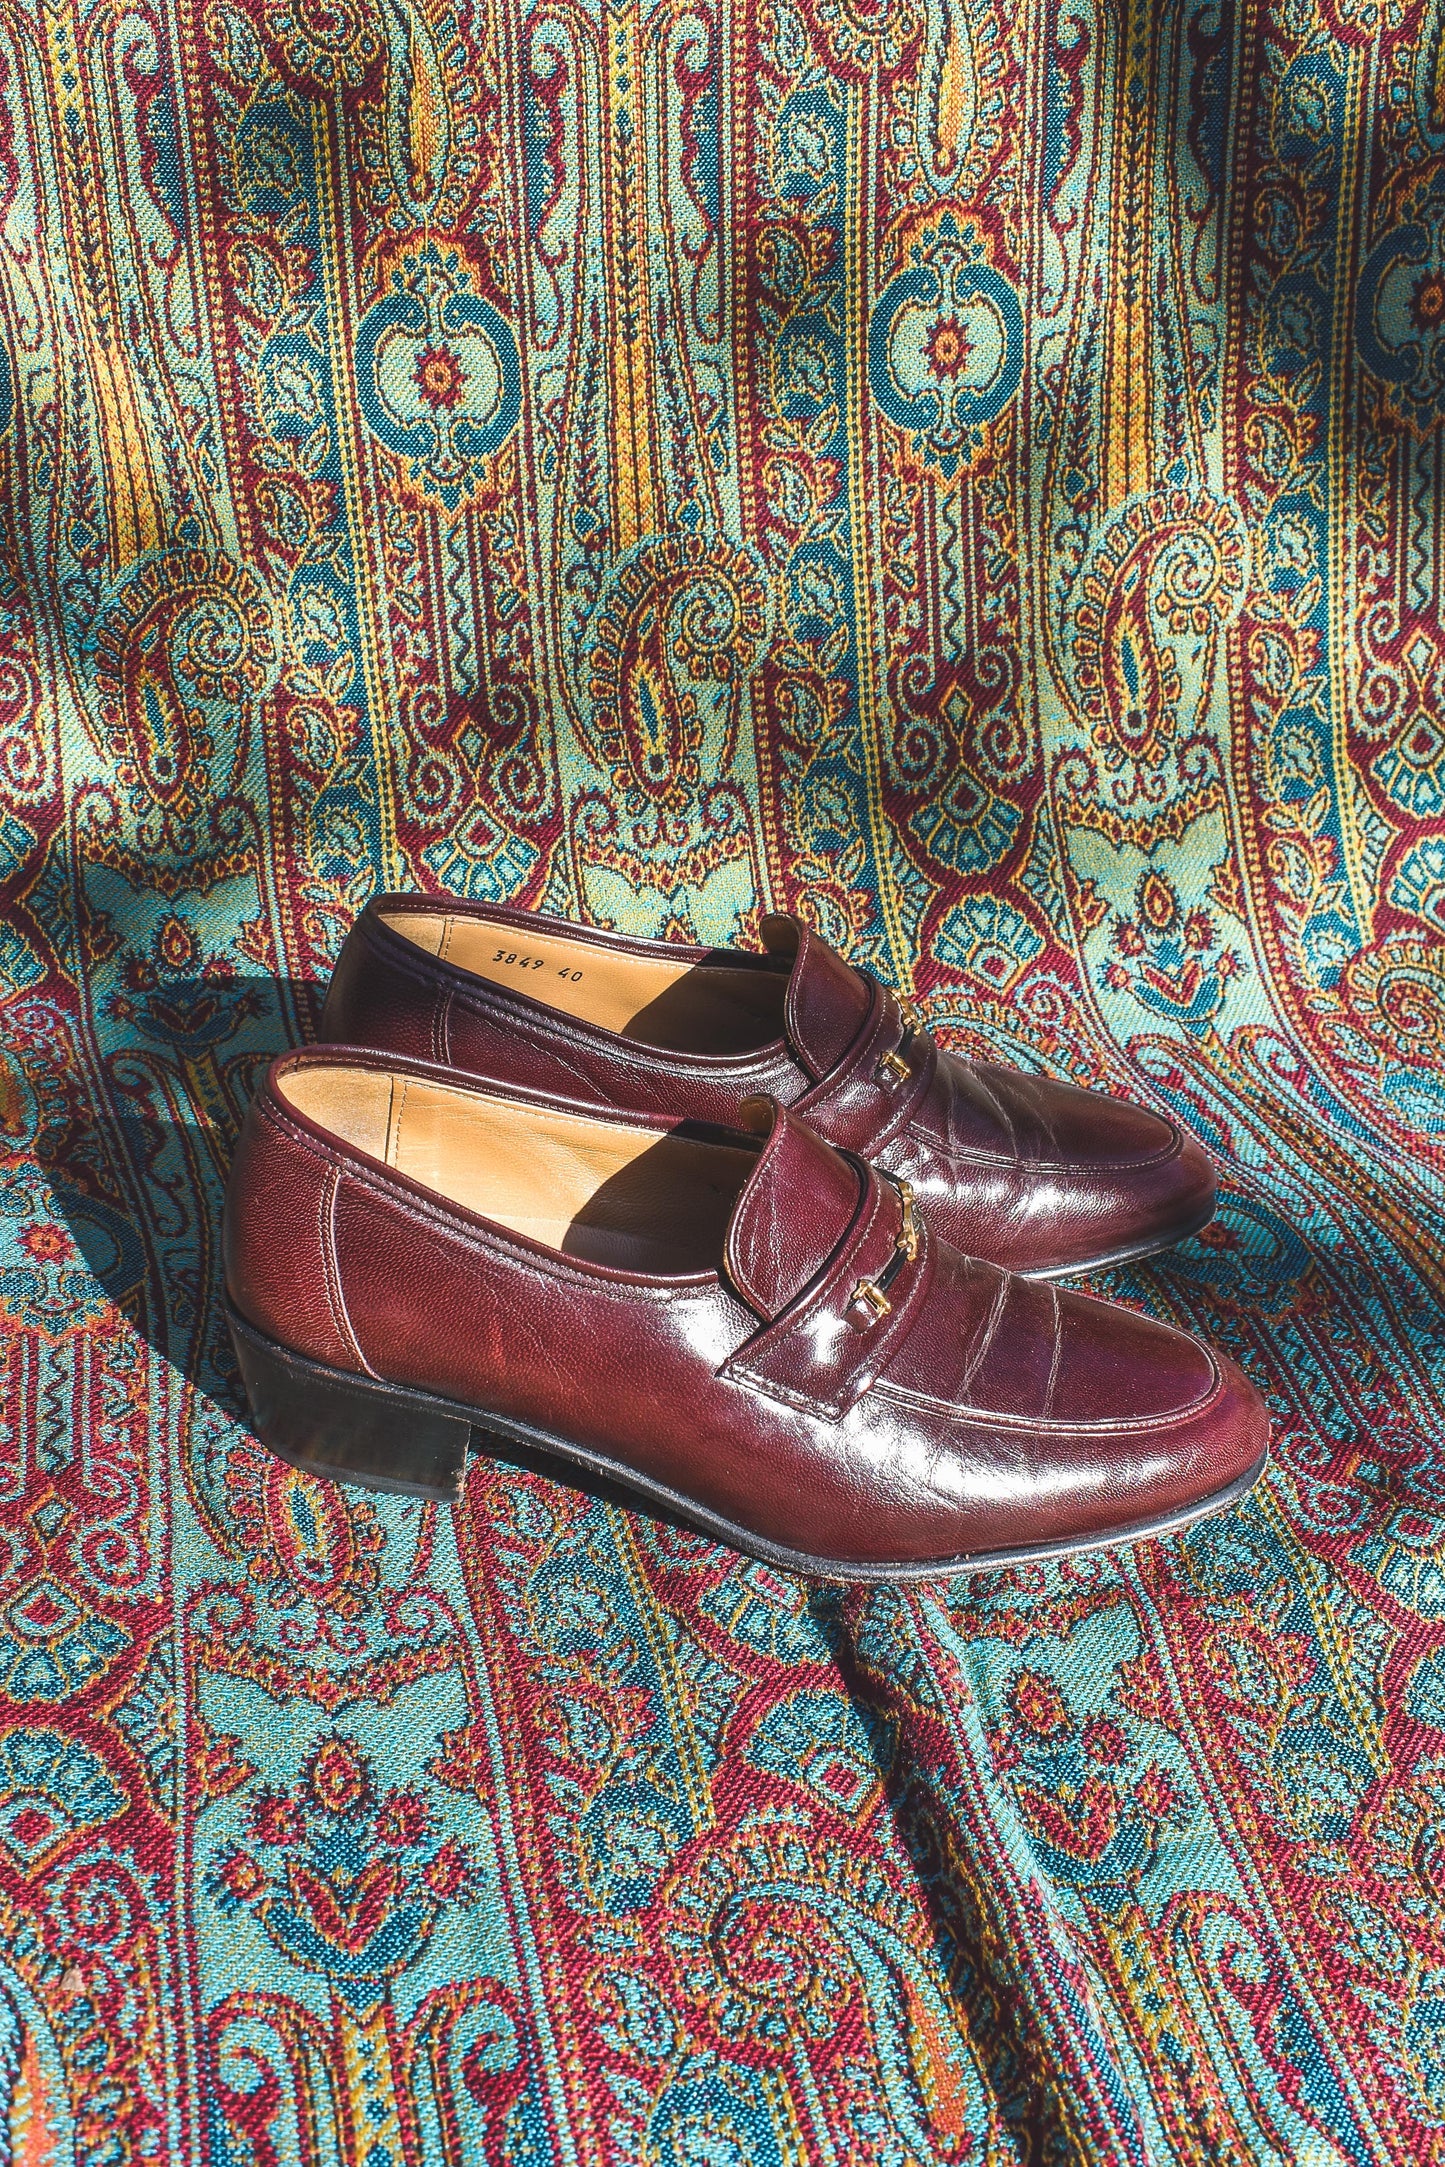 NEW IN! Vintage loafers